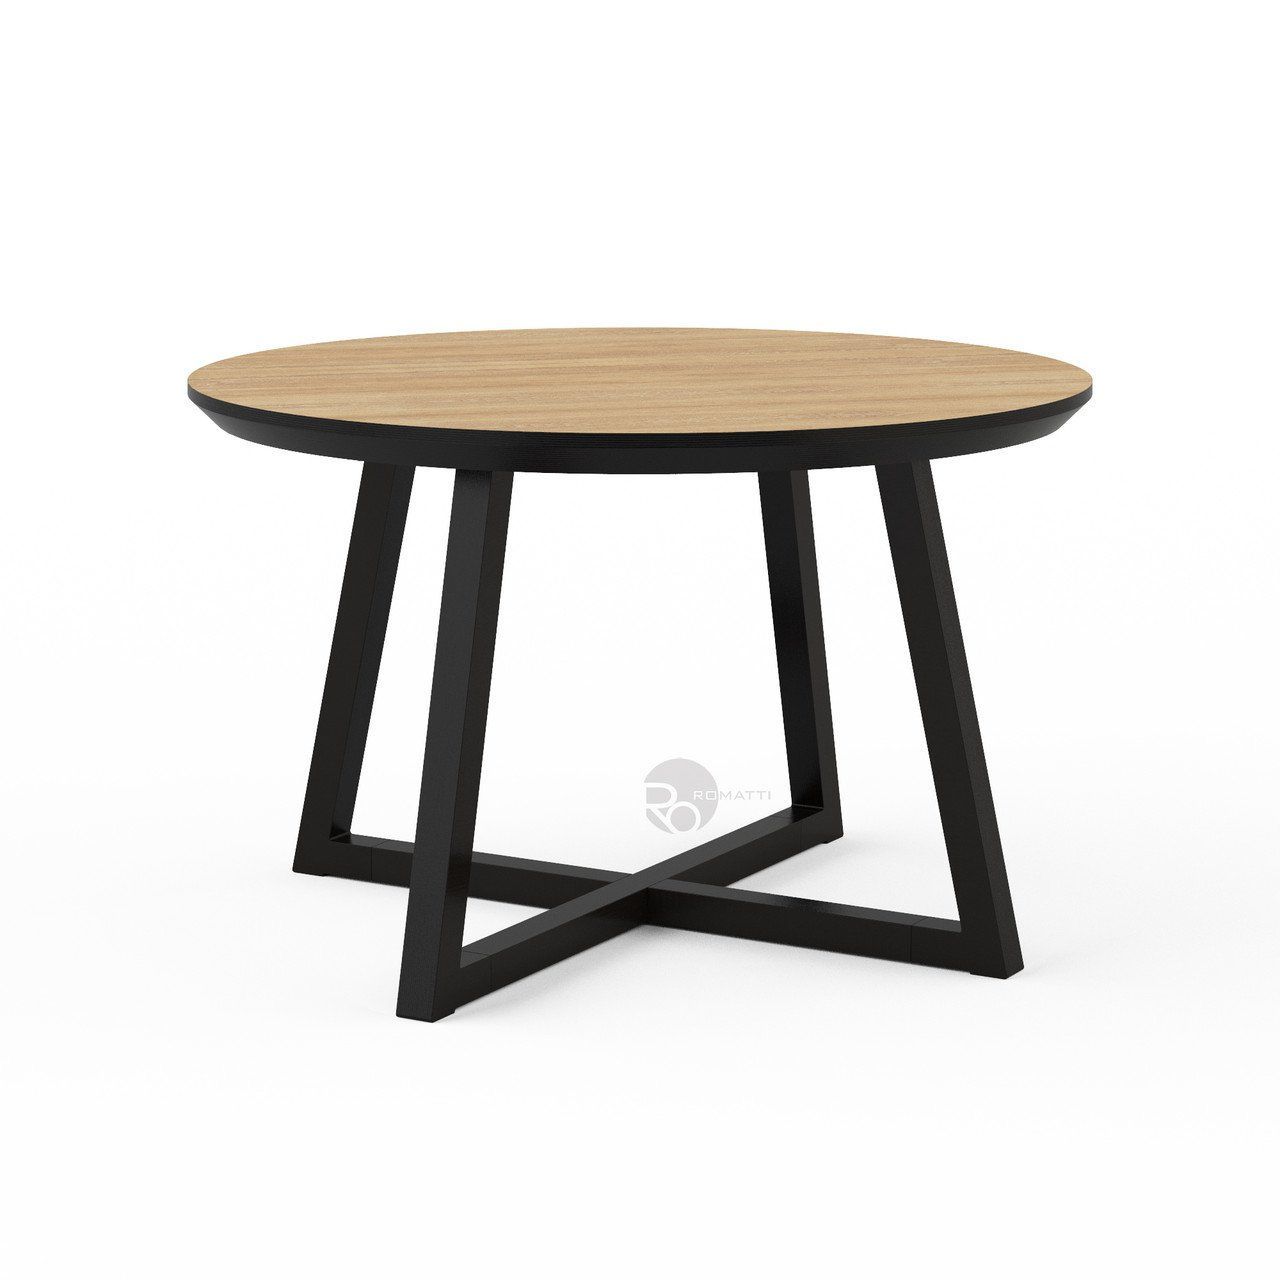 Anders by Romatti table